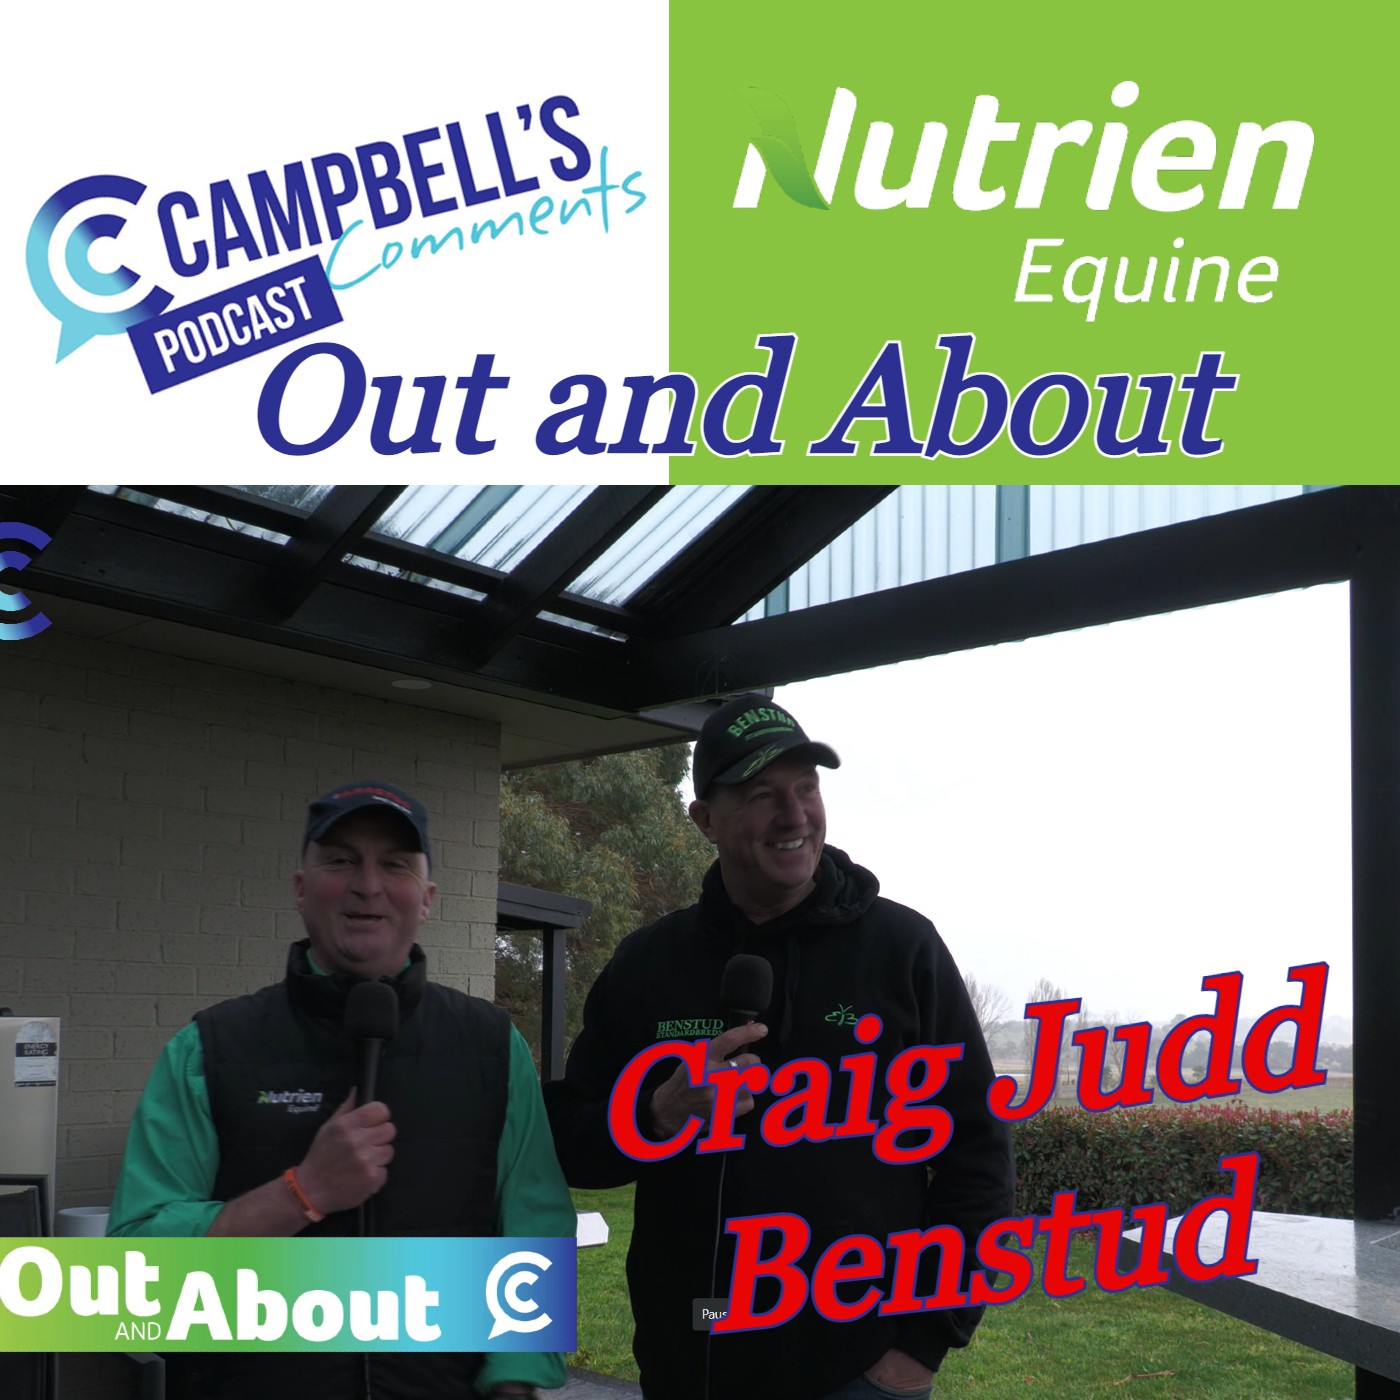 You are currently viewing 195: Campbells Comments Out and About with Craig Judd from Benstud Standardbreds